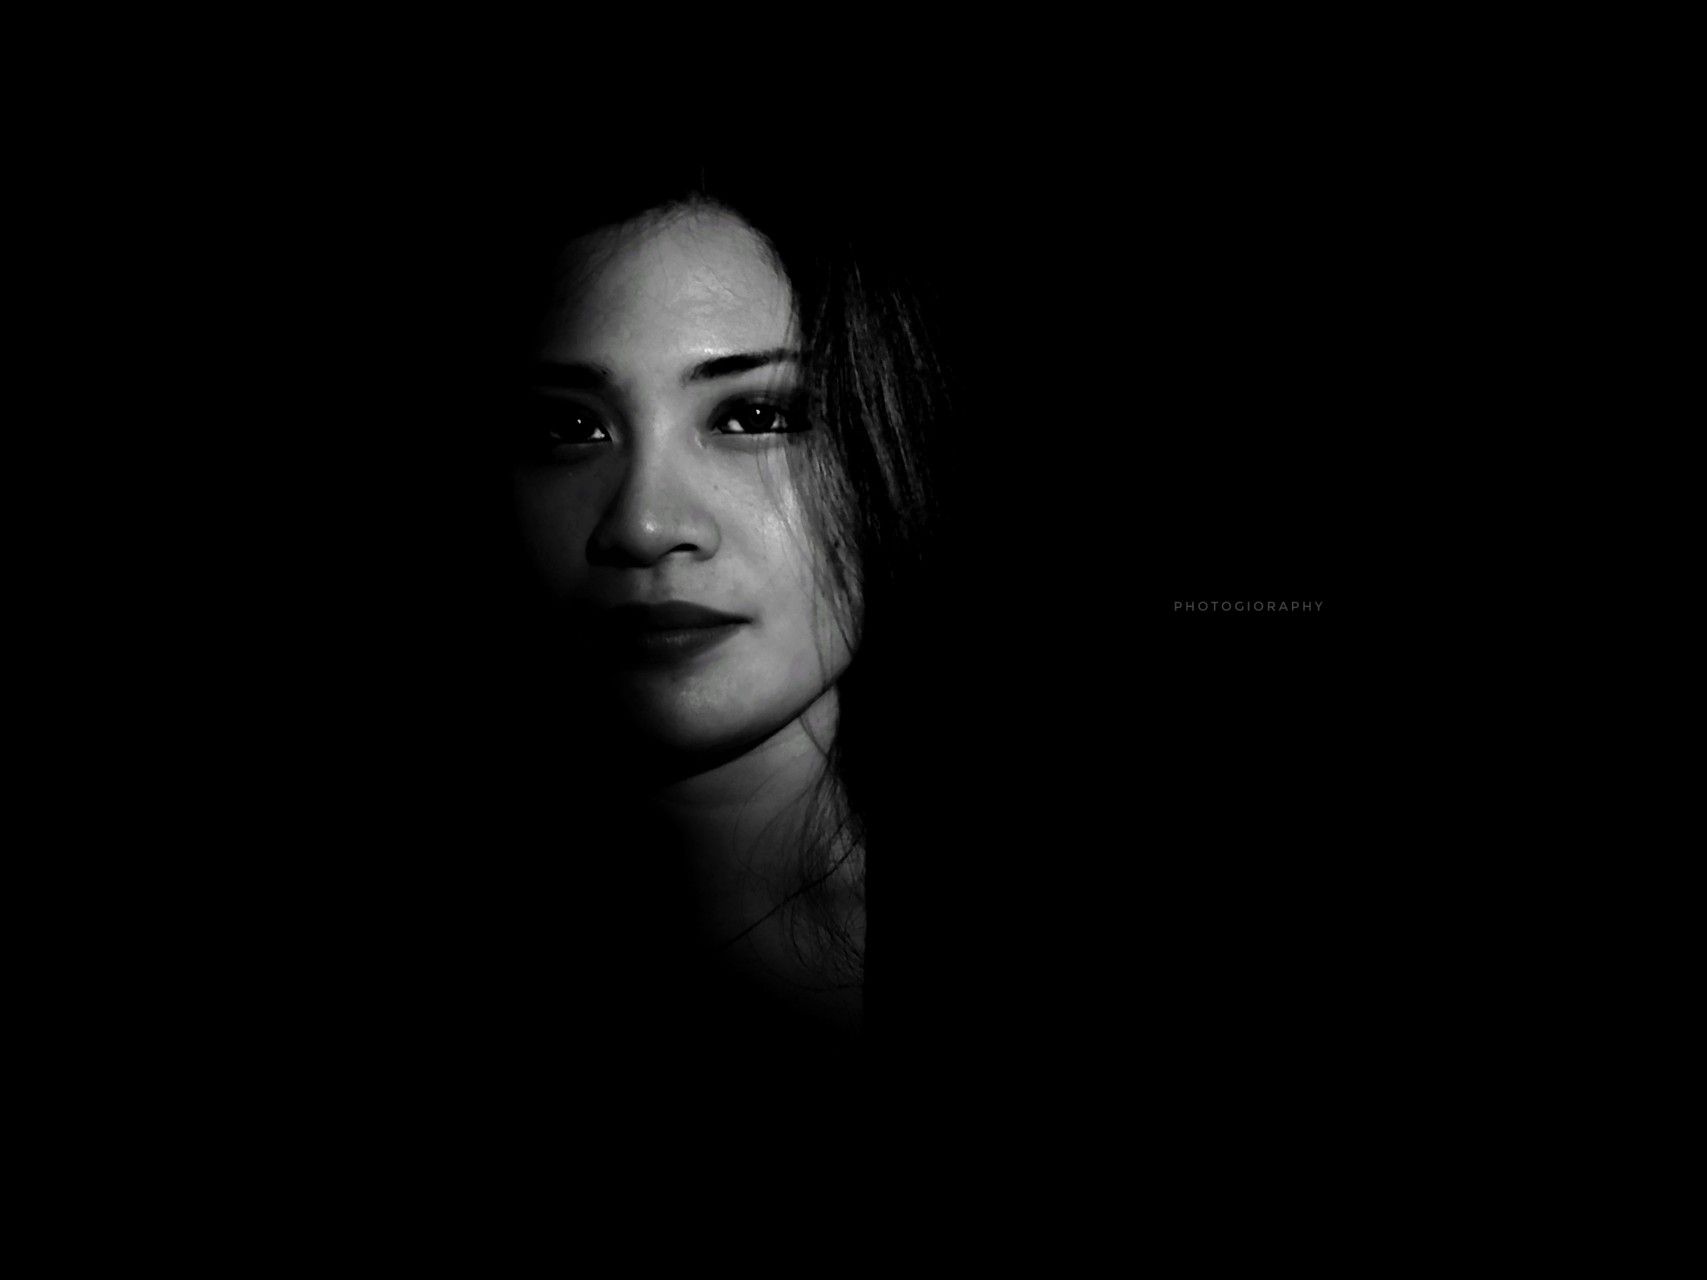 9 best High Key and Low Key Portraits images on Pinterest | Low key ...